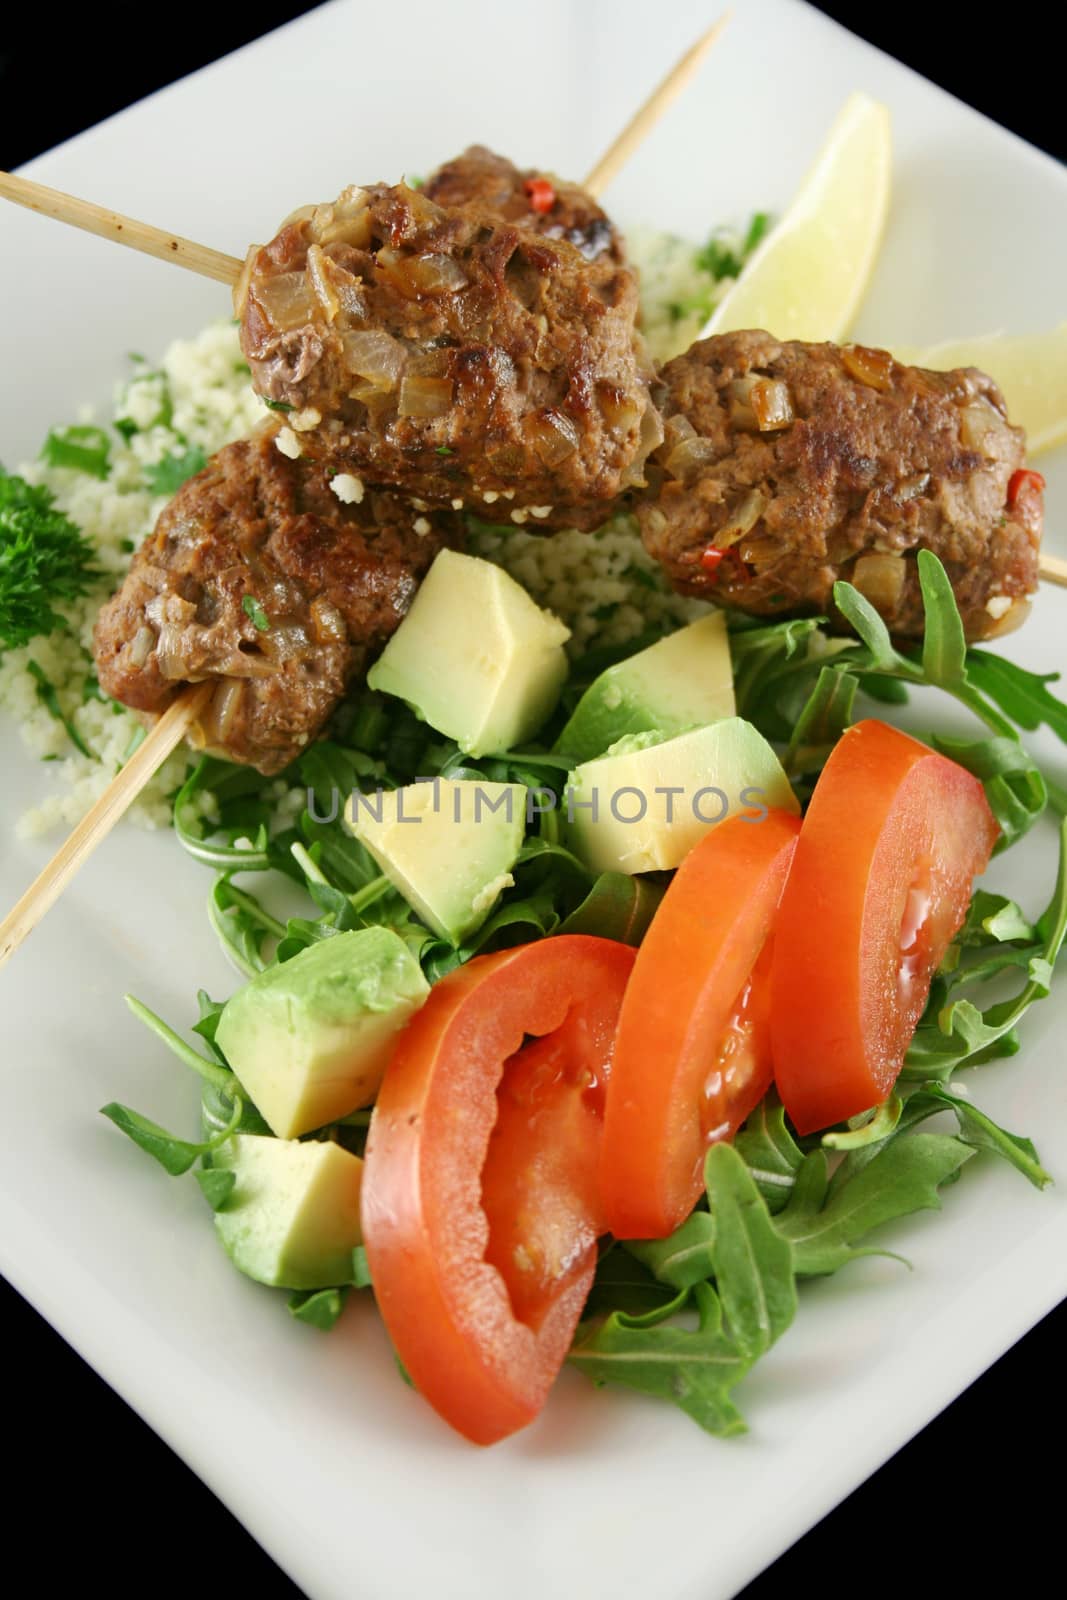 Beef koftas on parsley couscous with a garden salad.